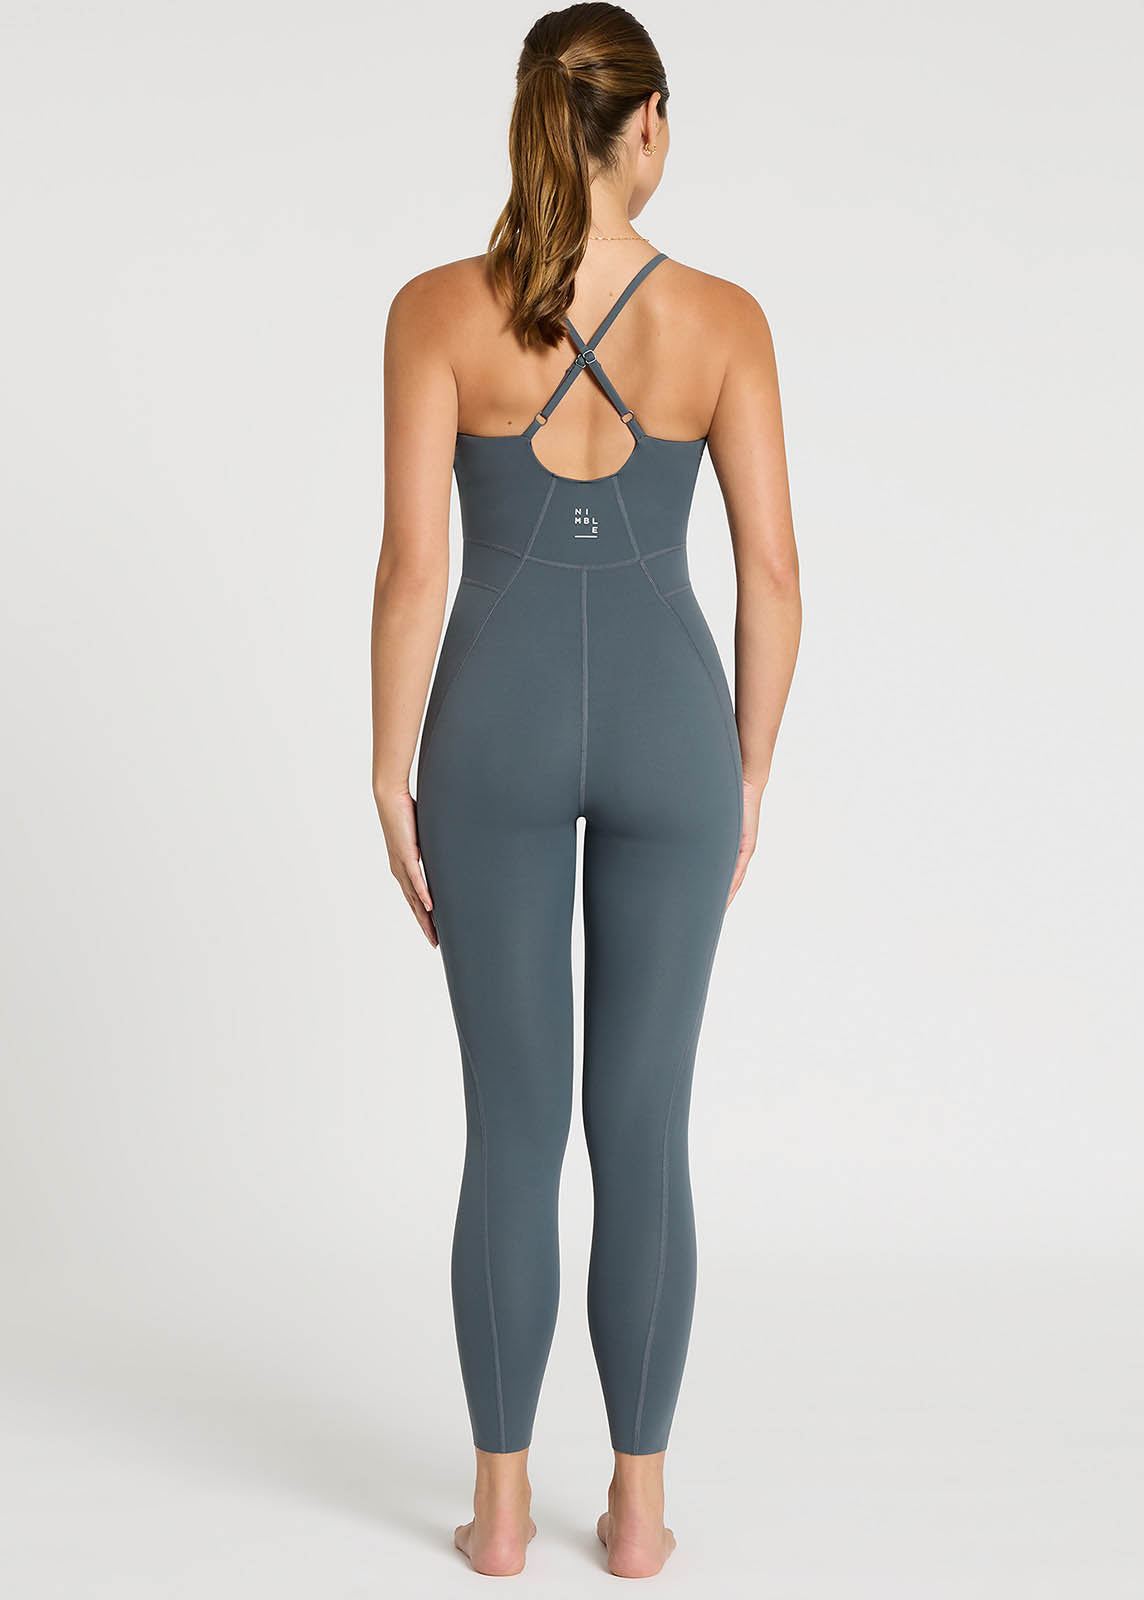 In Motion Strappy Ankle Onesie - Charcoal